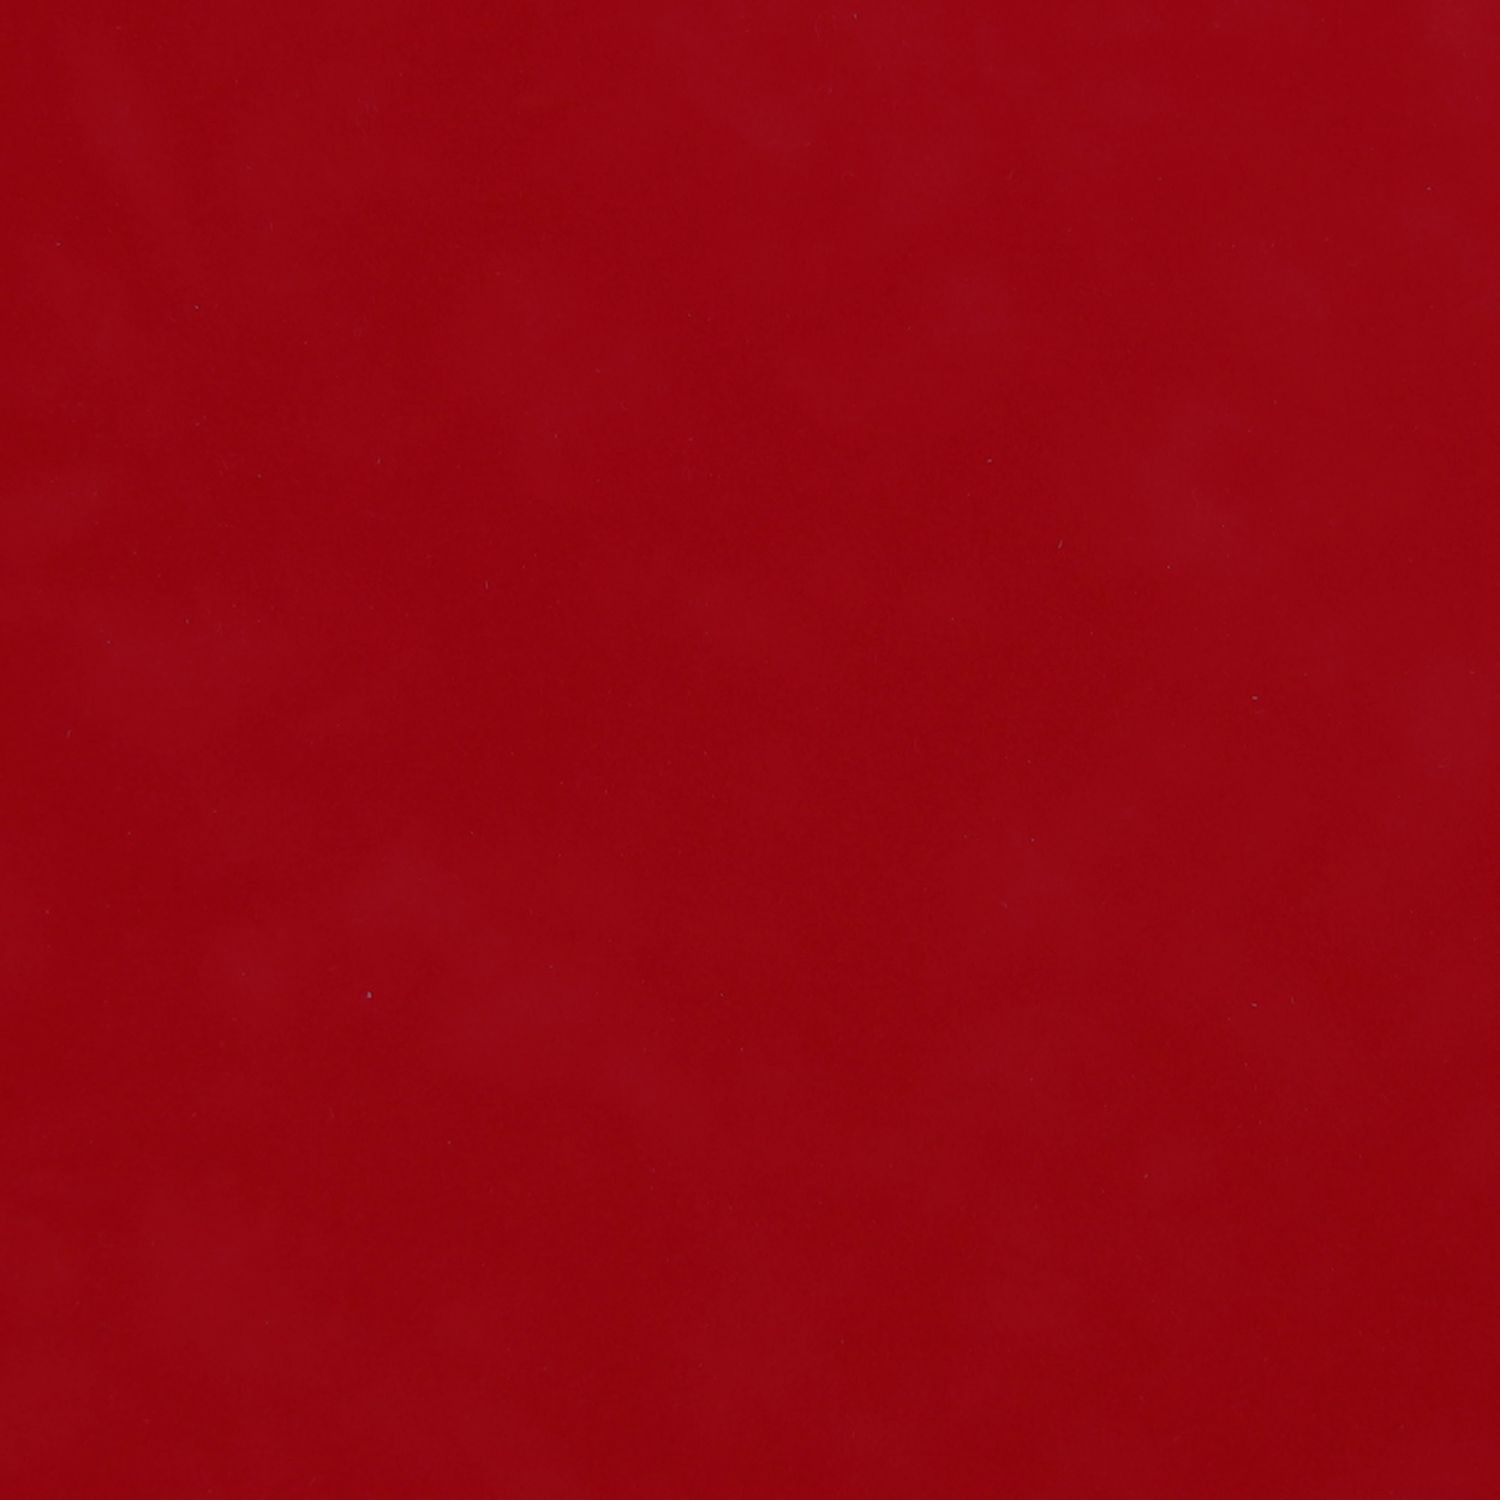 See To World Solid Red Backgrounds